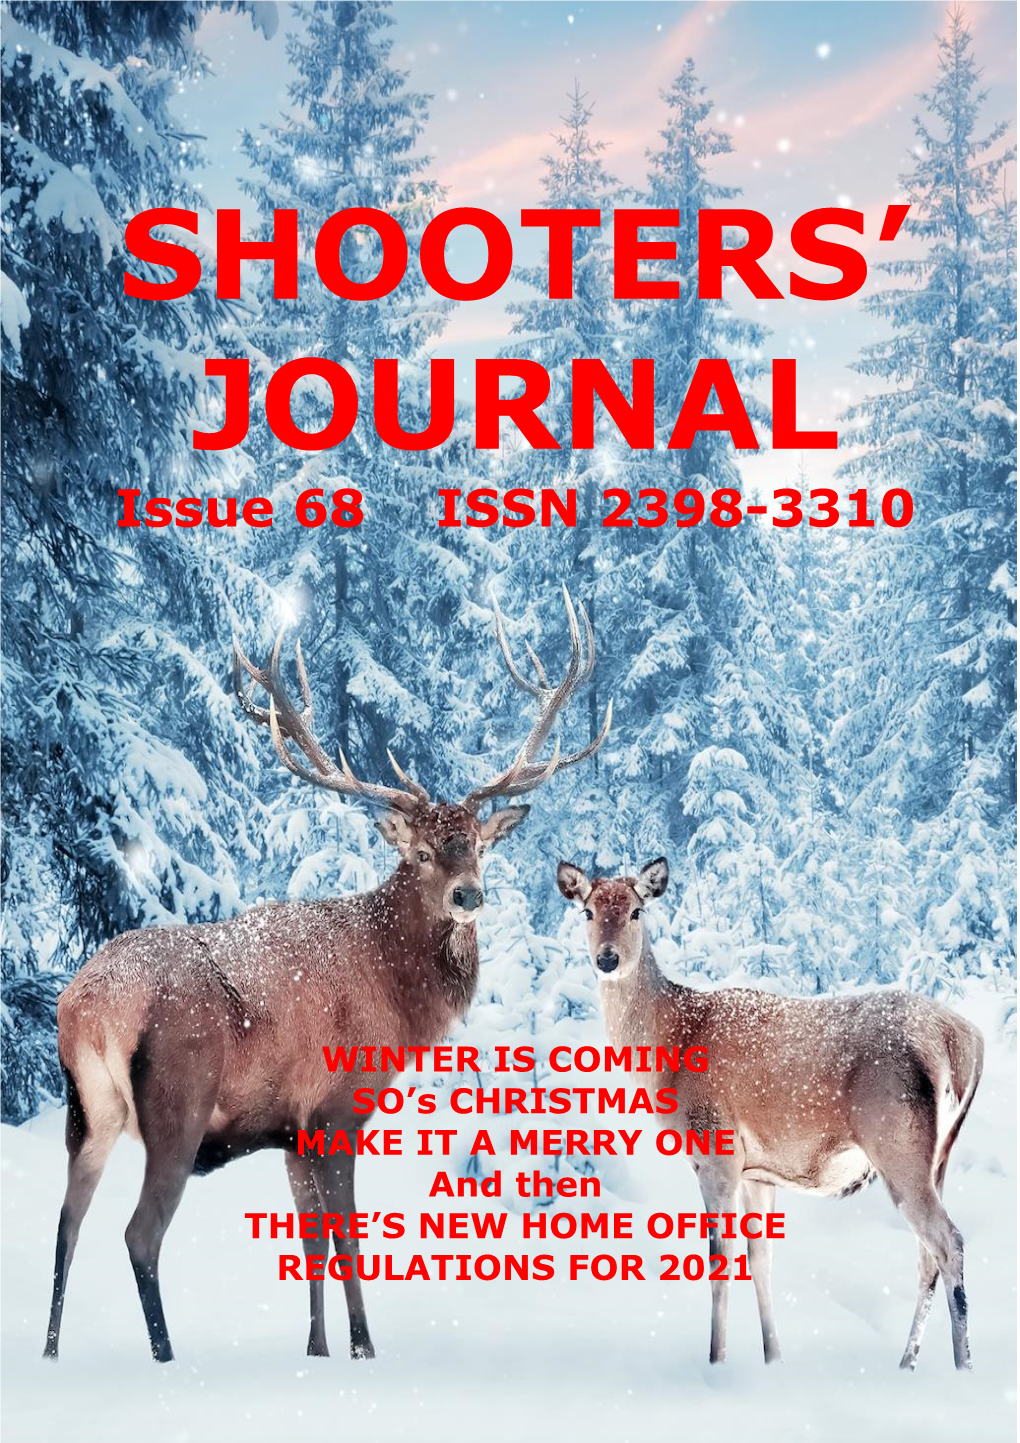 Issue 68 ISSN 2398-3310